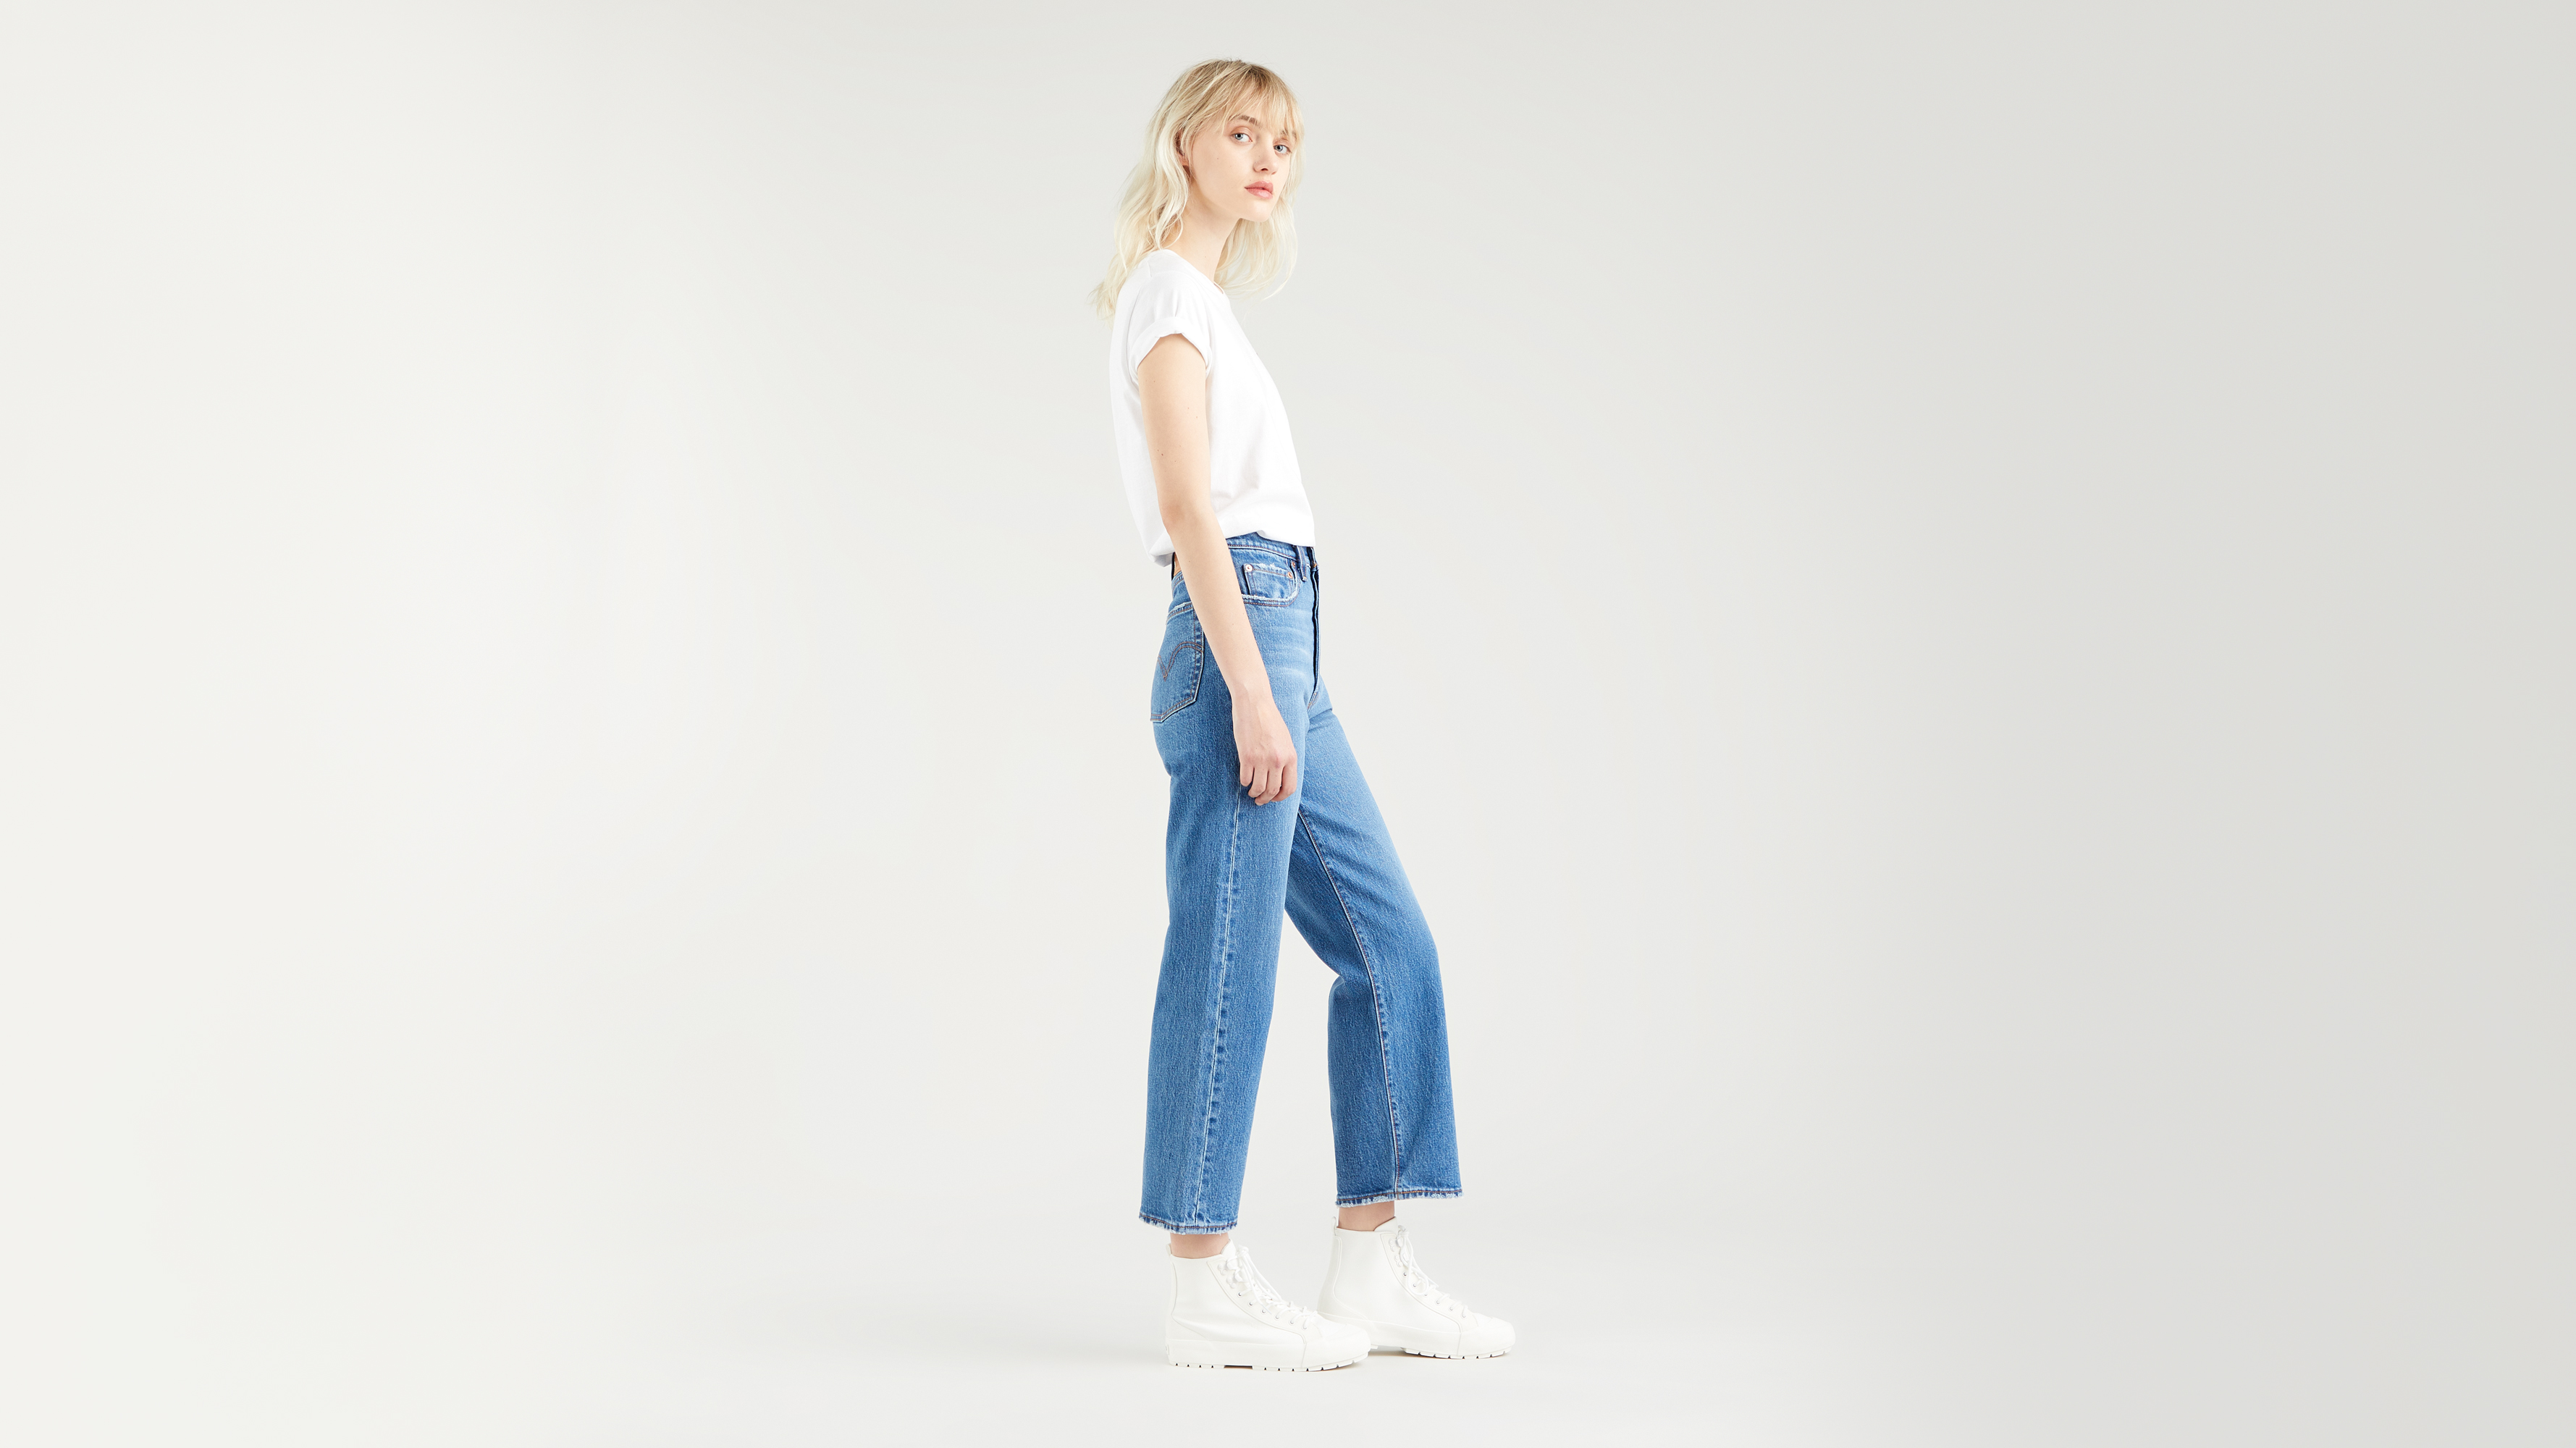 Ribcage Straight Ankle Jeans, Jive Together, 28/29